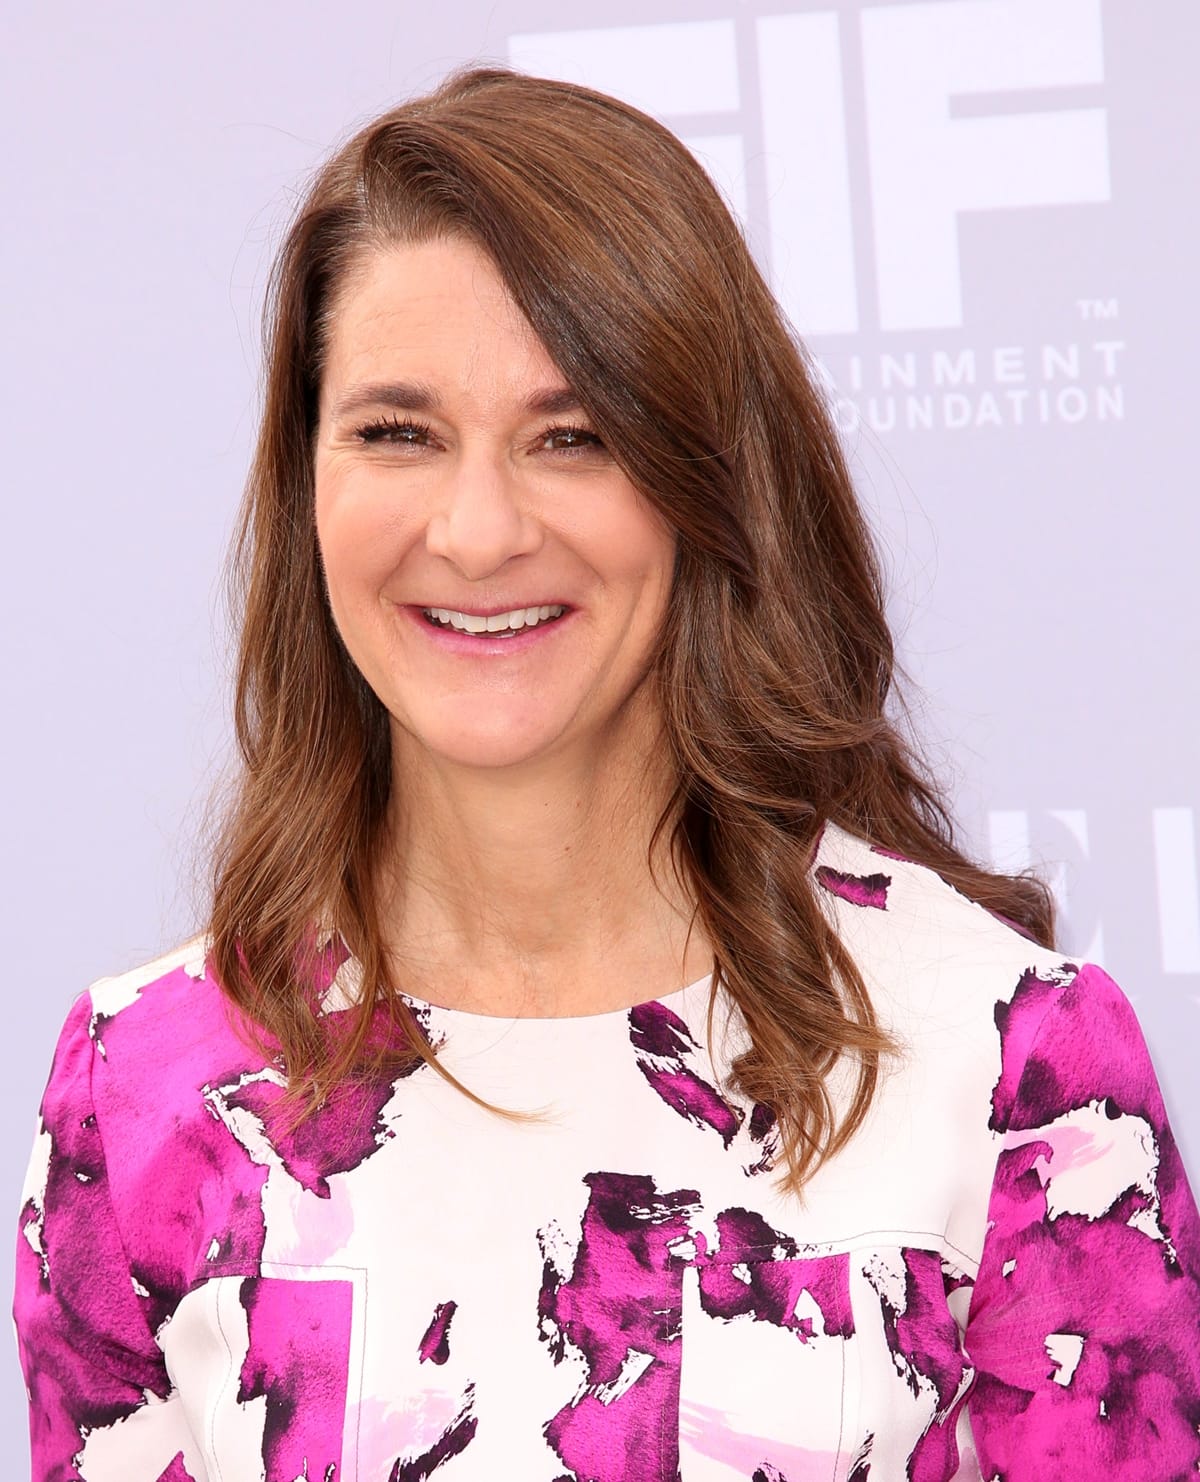 It has been reported Melinda Gates wants to increase her three children's inheritance from the $10 million previously agreed upon